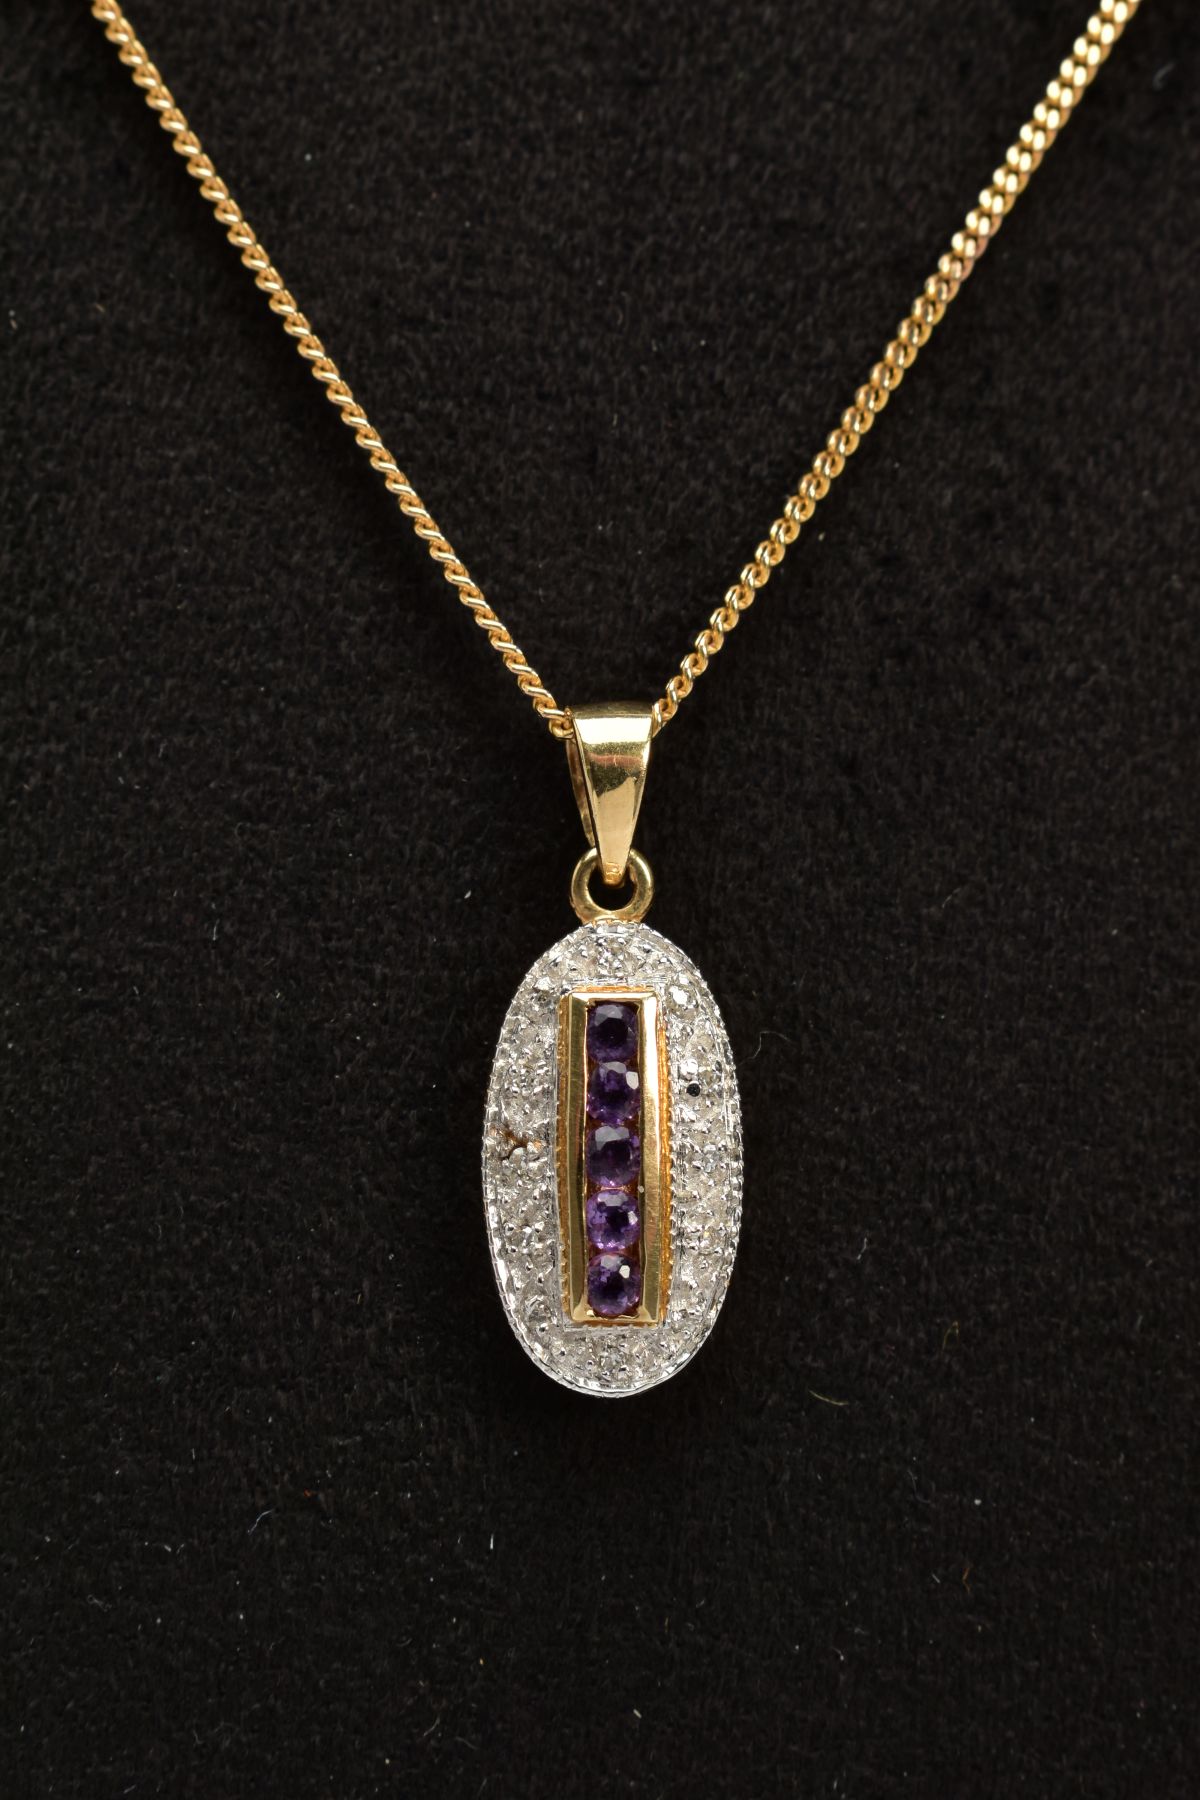 A 9CT GOLD AMETHYST AND DIAMOND PENDANT NECKLACE, the oval pendant designed with a central row of